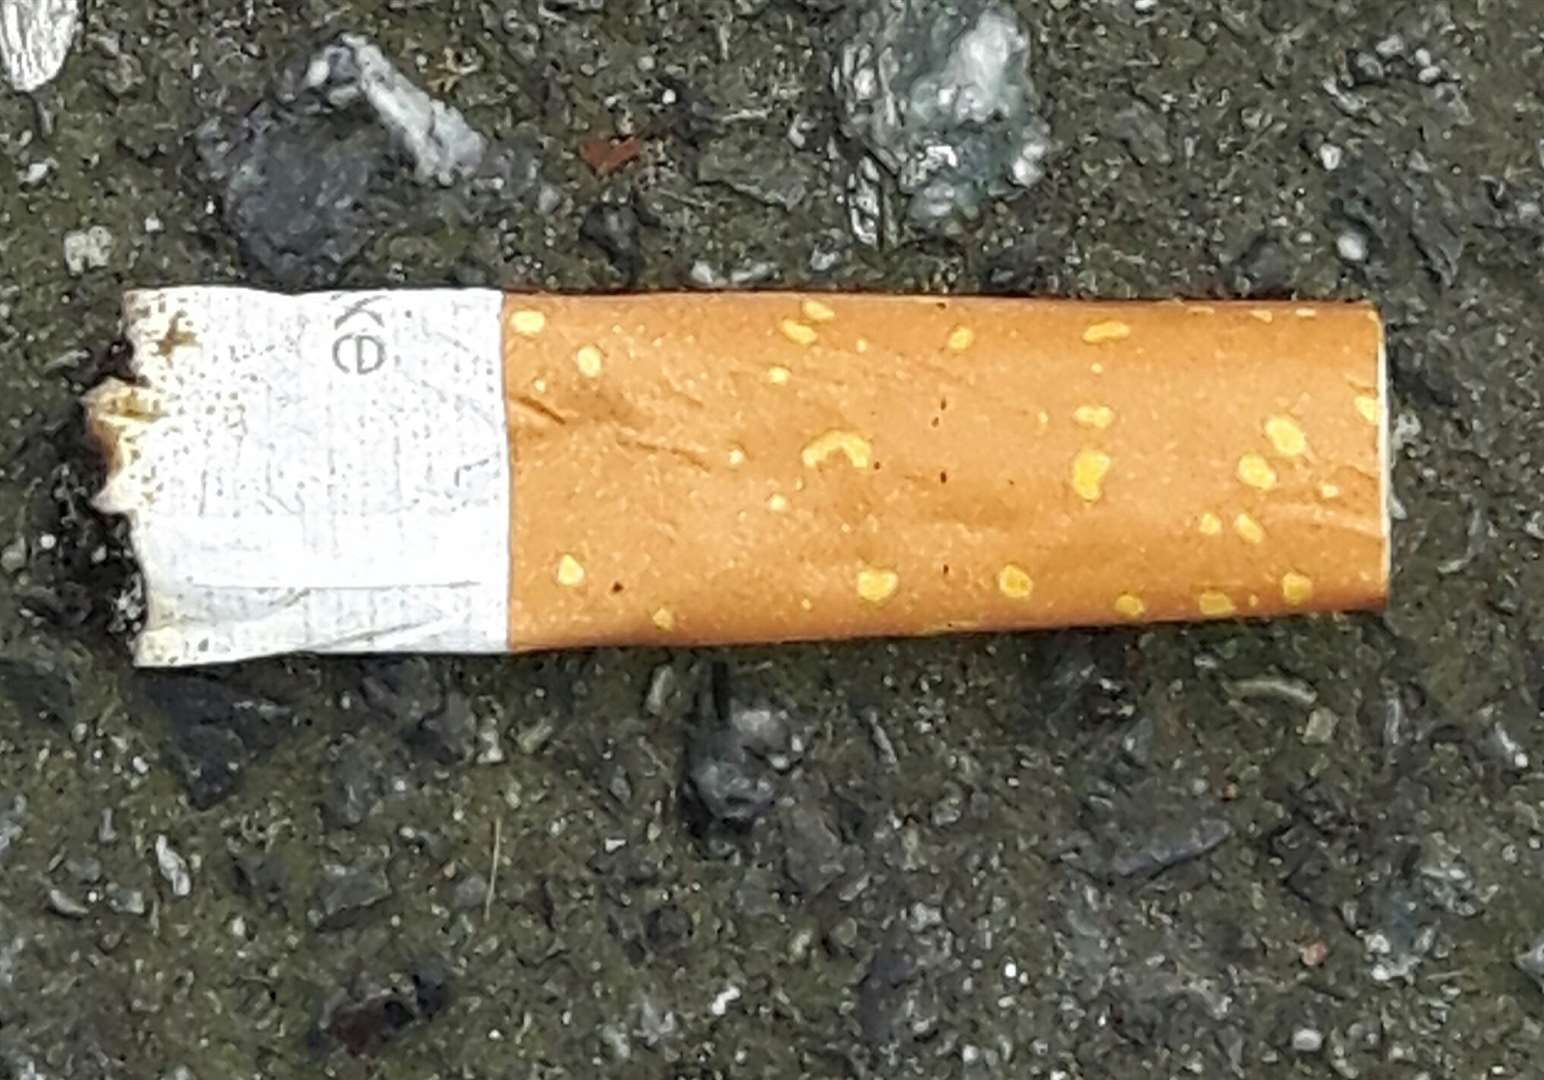 Cigarette ends are the number one form of litter in this country